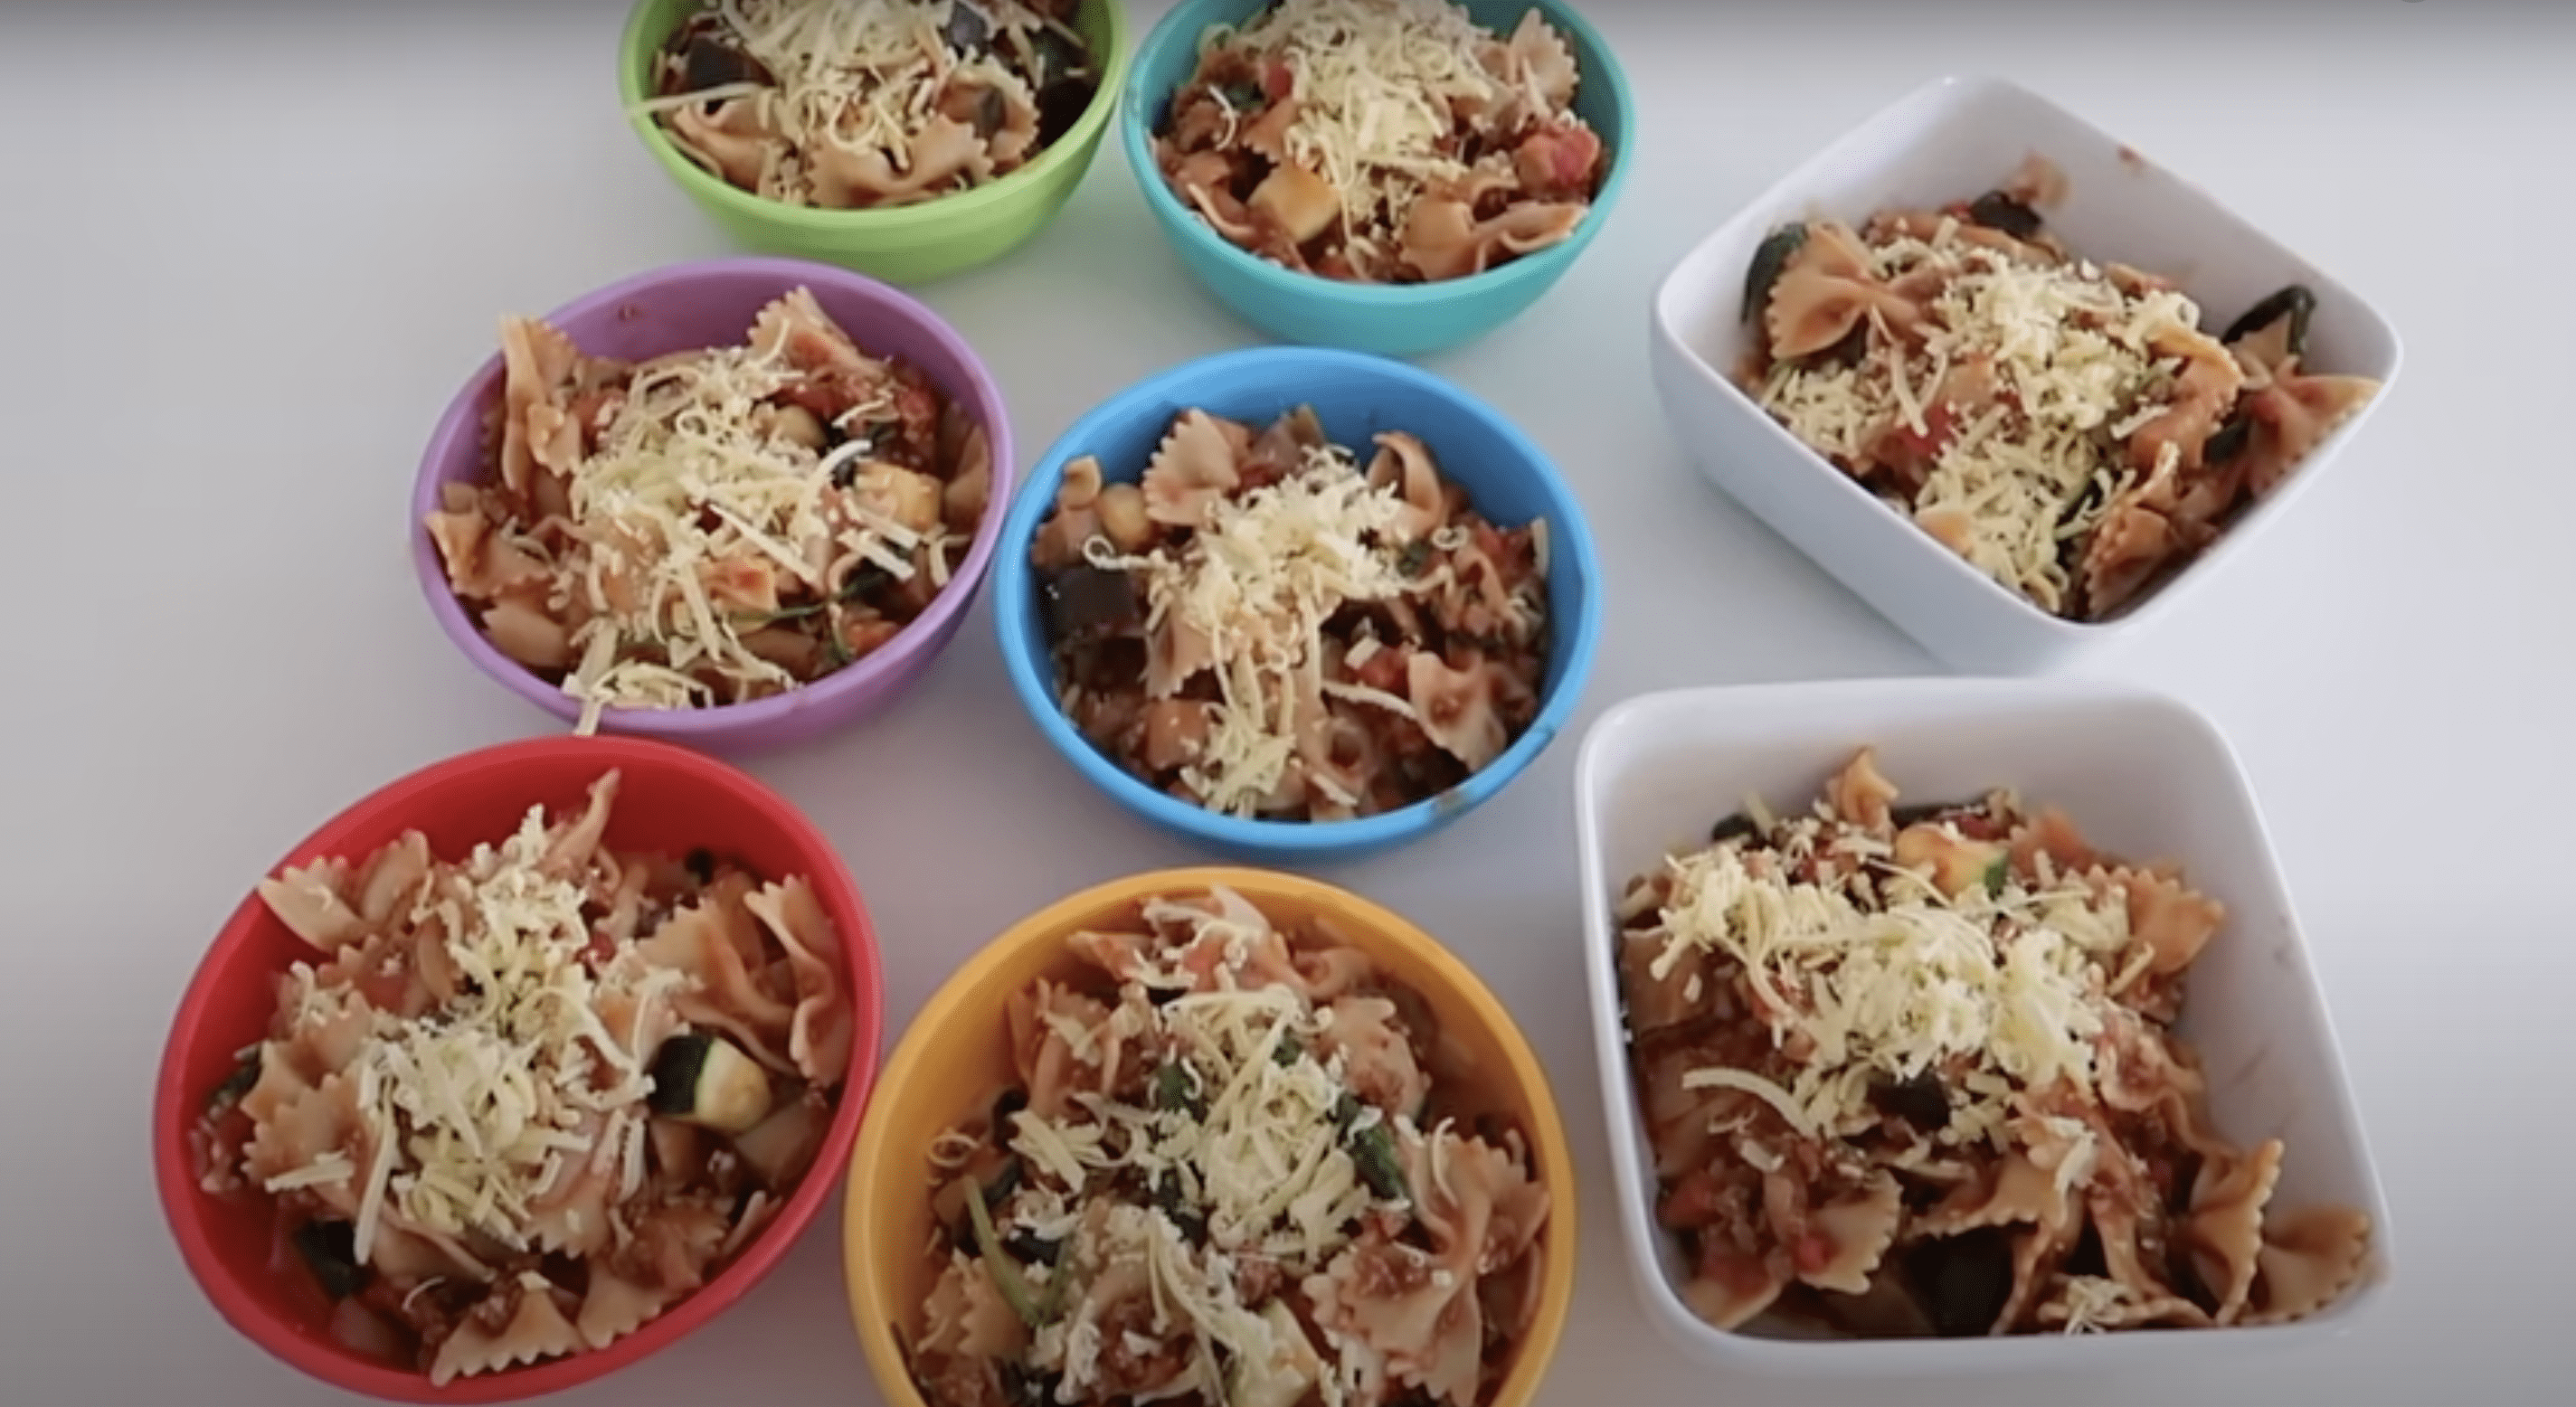 Pasta is served in bowls for each Dunstan kid. | Source: YouTube.com/Life with Beans